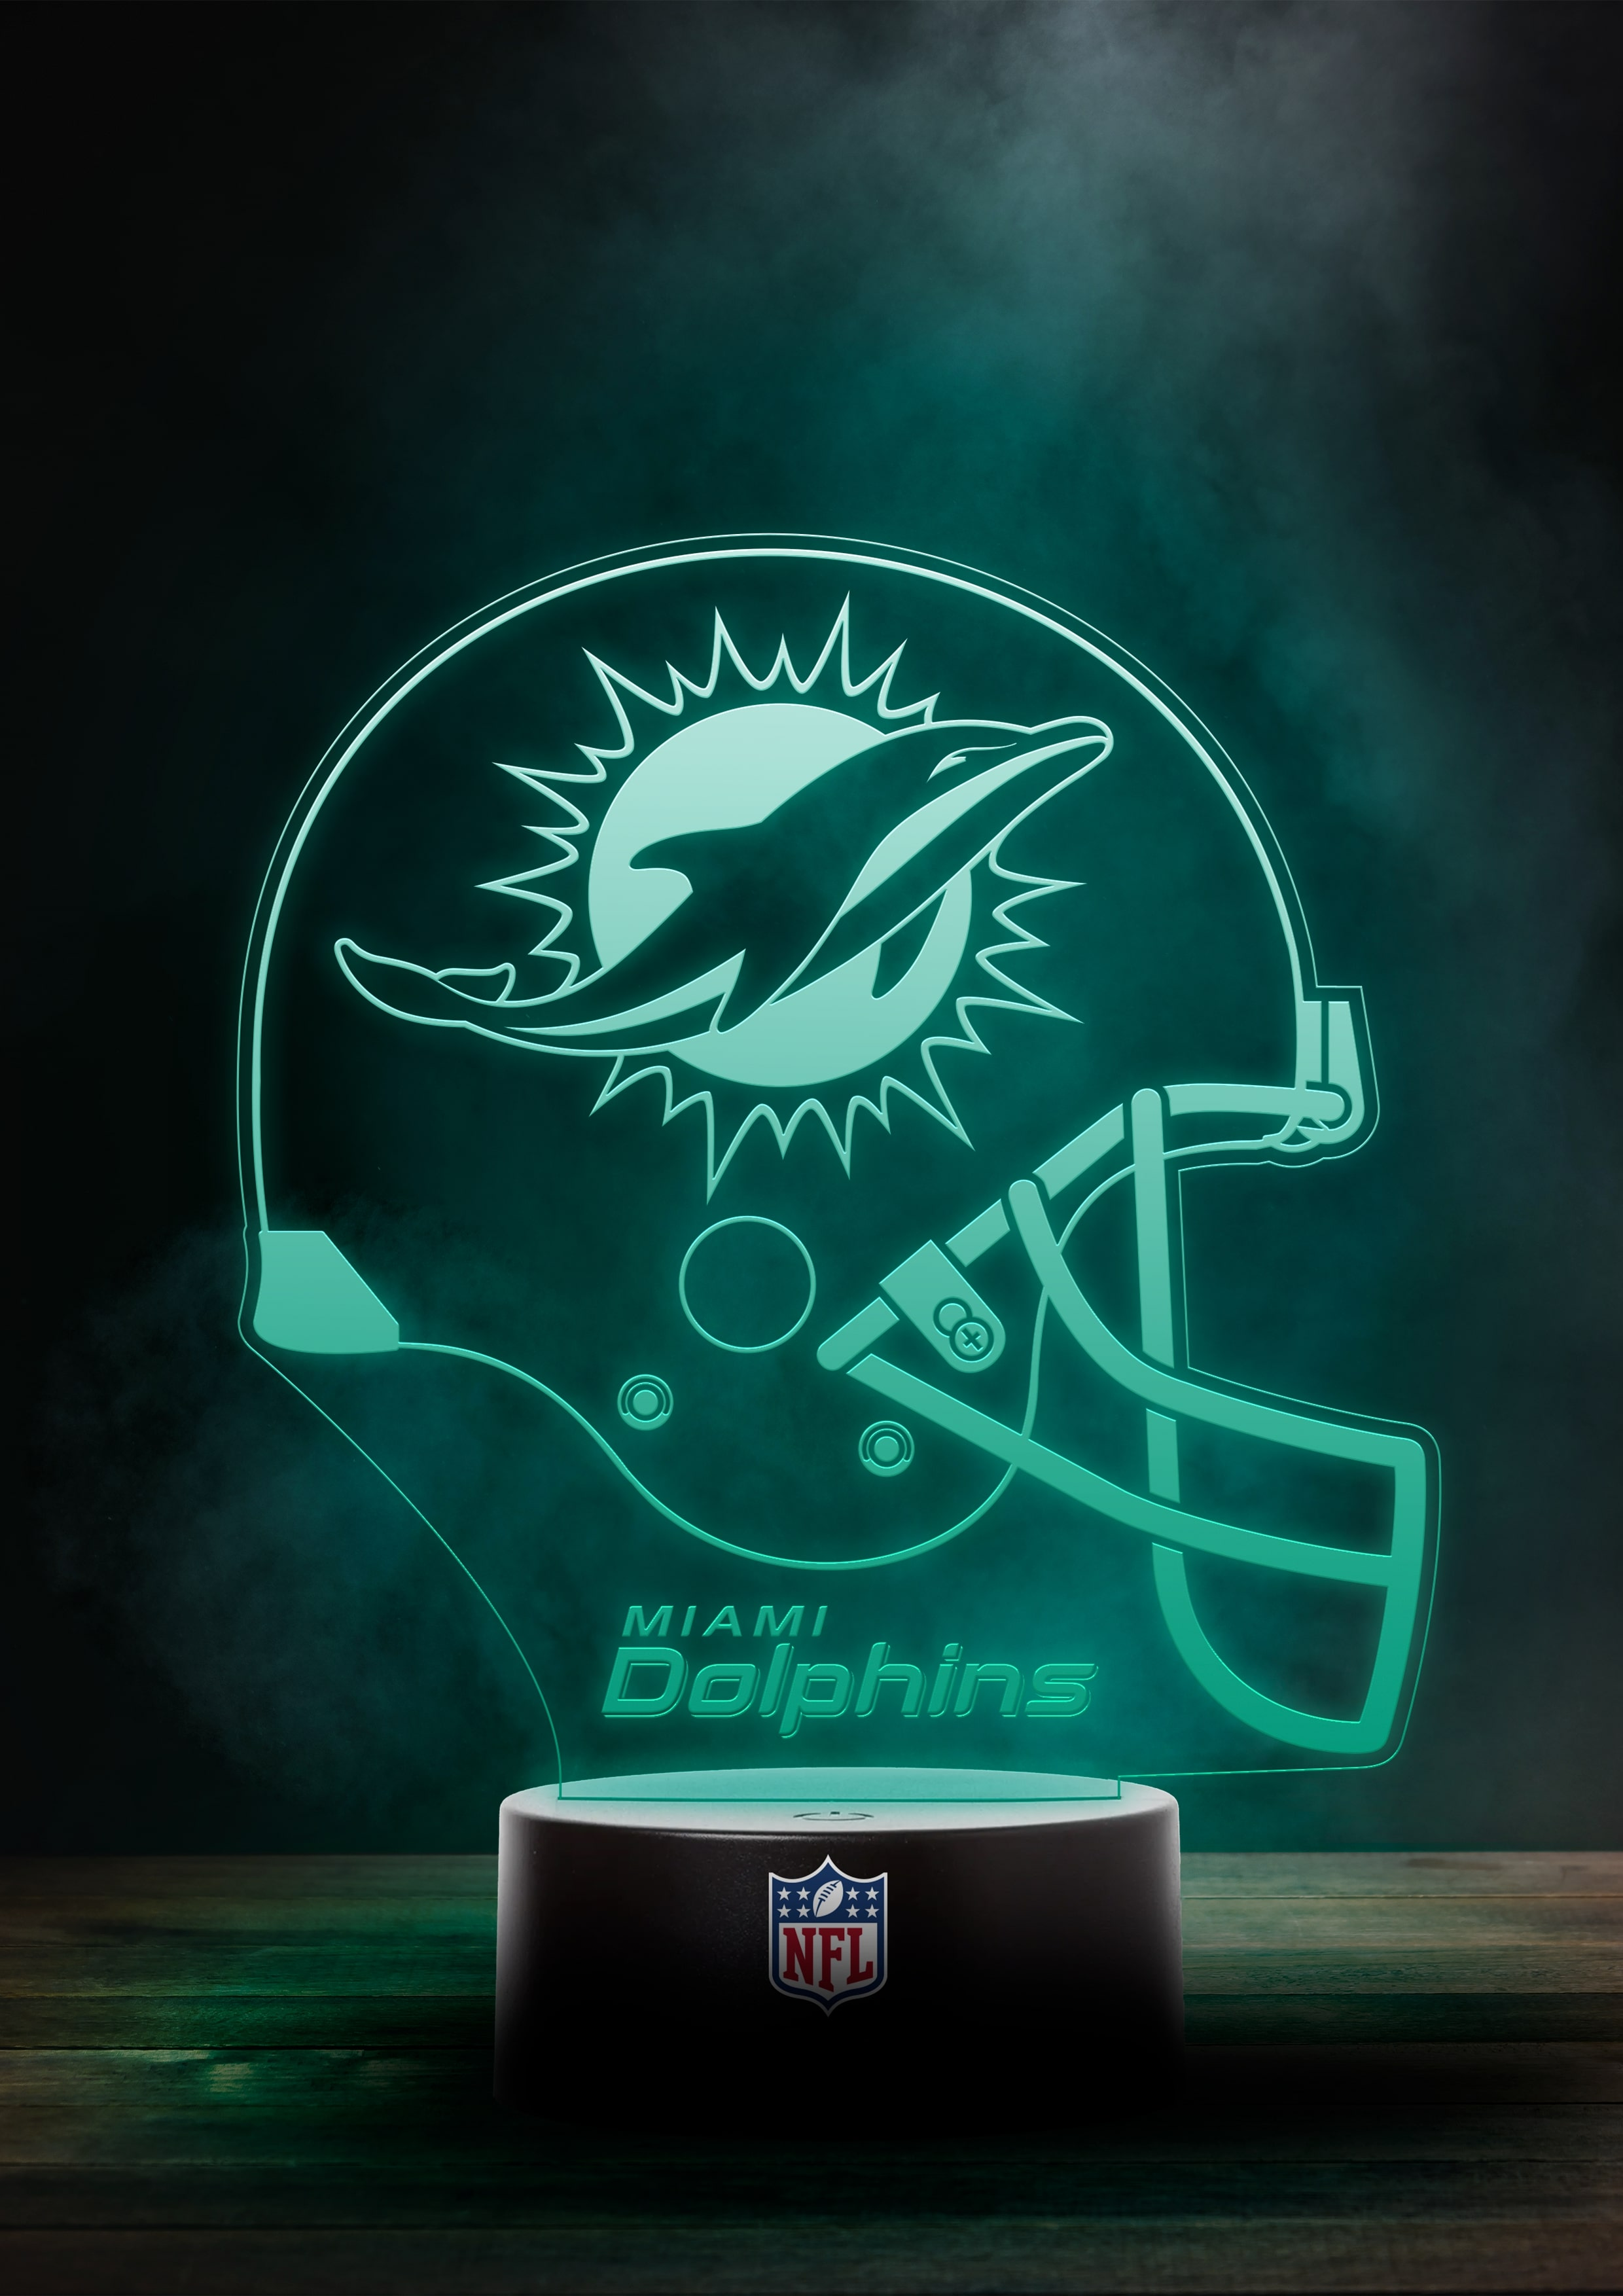 BRANDING LED-Licht GREAT NFL Miami Dolphins Football \